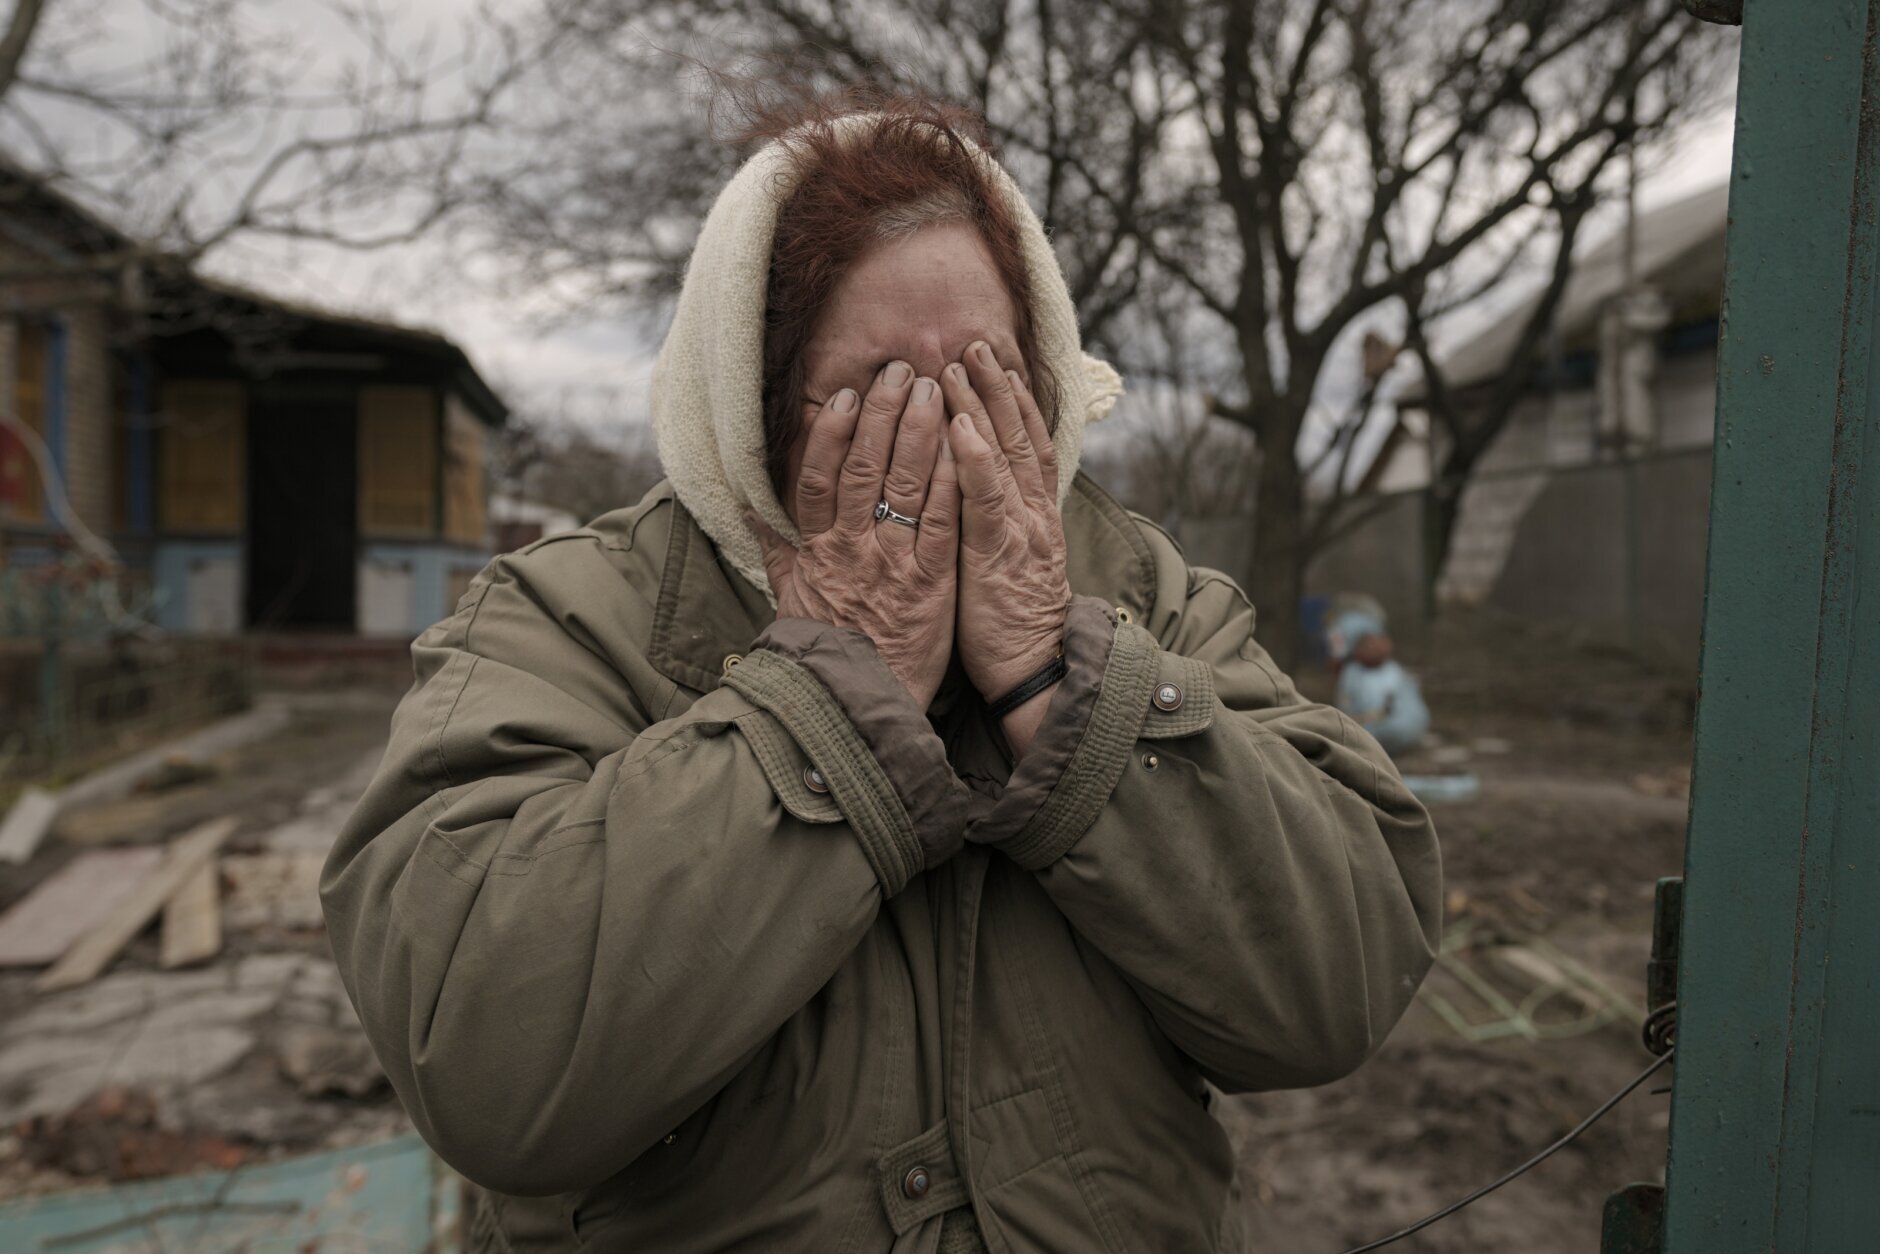 Tetiana Oleksiienko cries standing at the gate of her house in the village of Andriivka, Ukraine, heavily affected by fighting between Russian and Ukrainian forces, Wednesday, April 6, 2022. Several buildings in the village were reduced to mounds of bricks and corrugated metal and residents struggle without heat, electricity or cooking gas. (AP Photo/Vadim Ghirda)